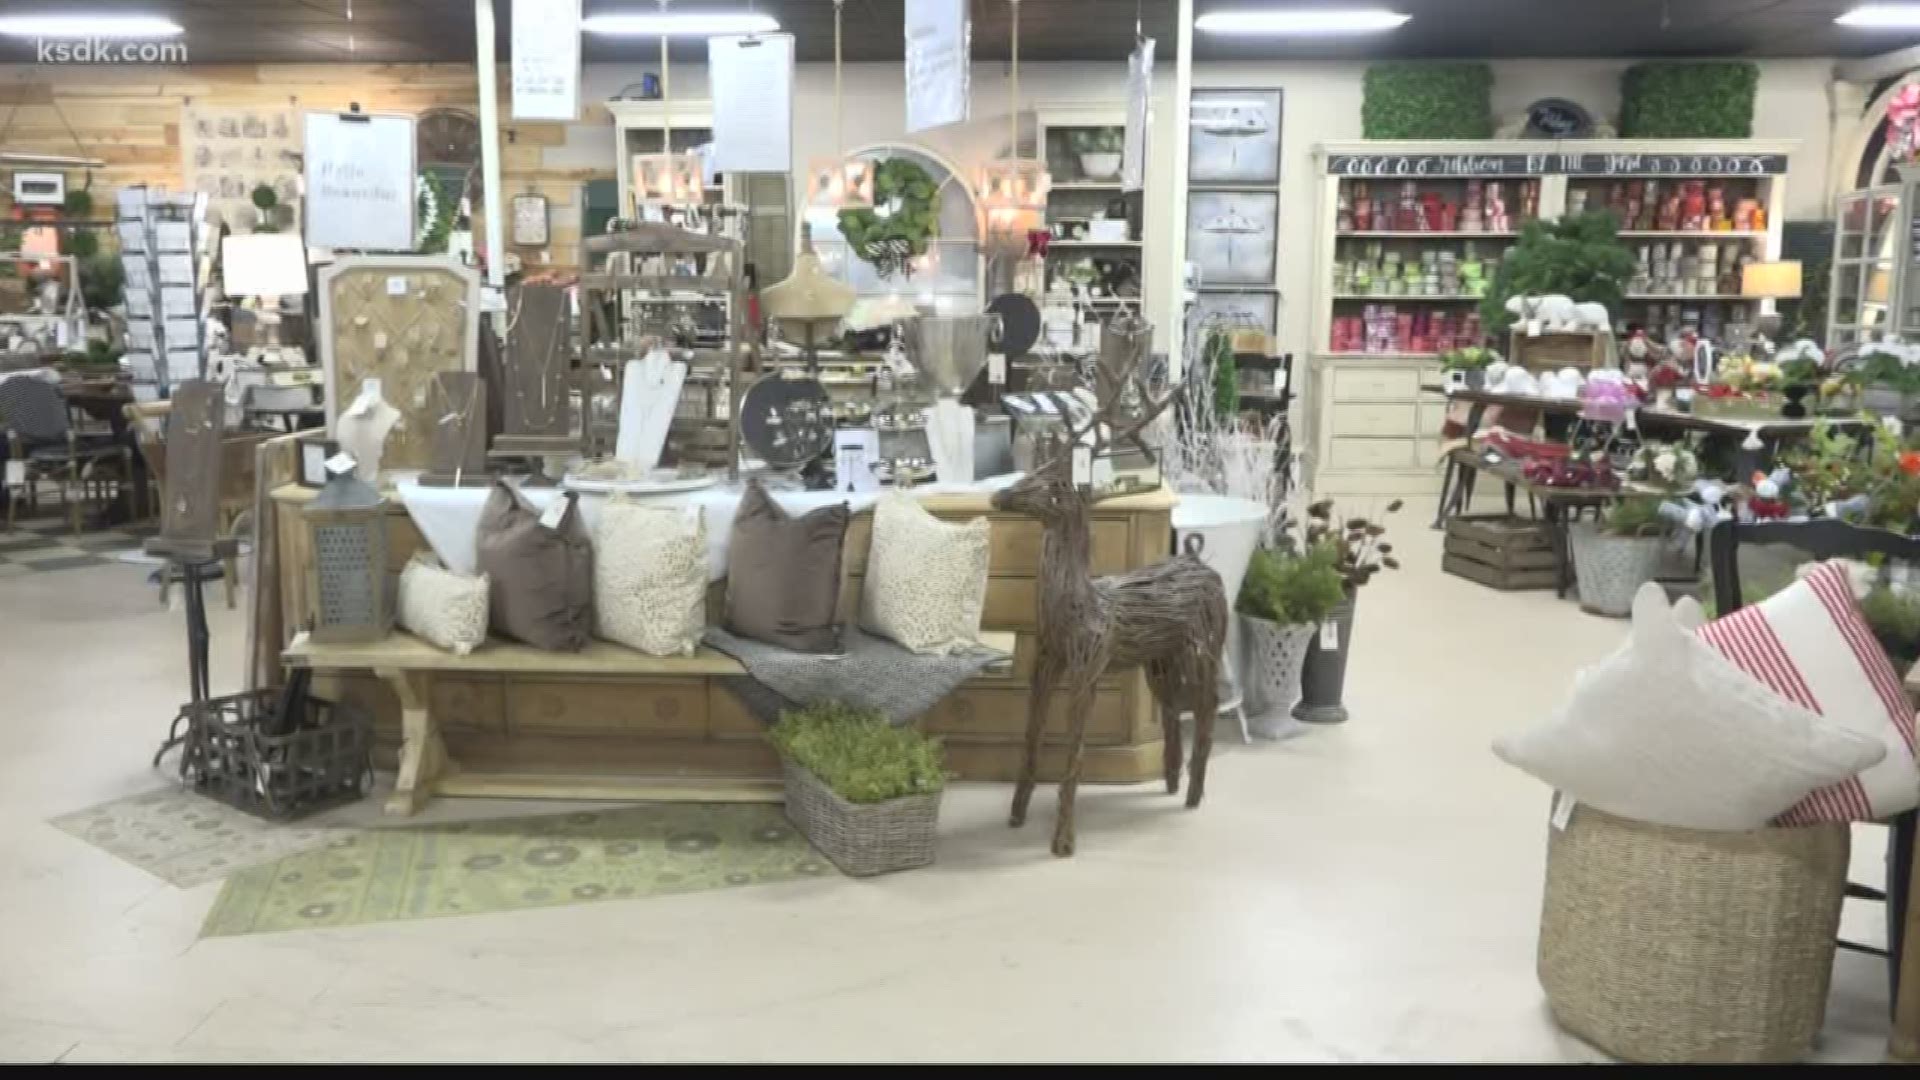 If you need help decorating your home or picking out furniture, Marketplace at they Abbey is here to help.